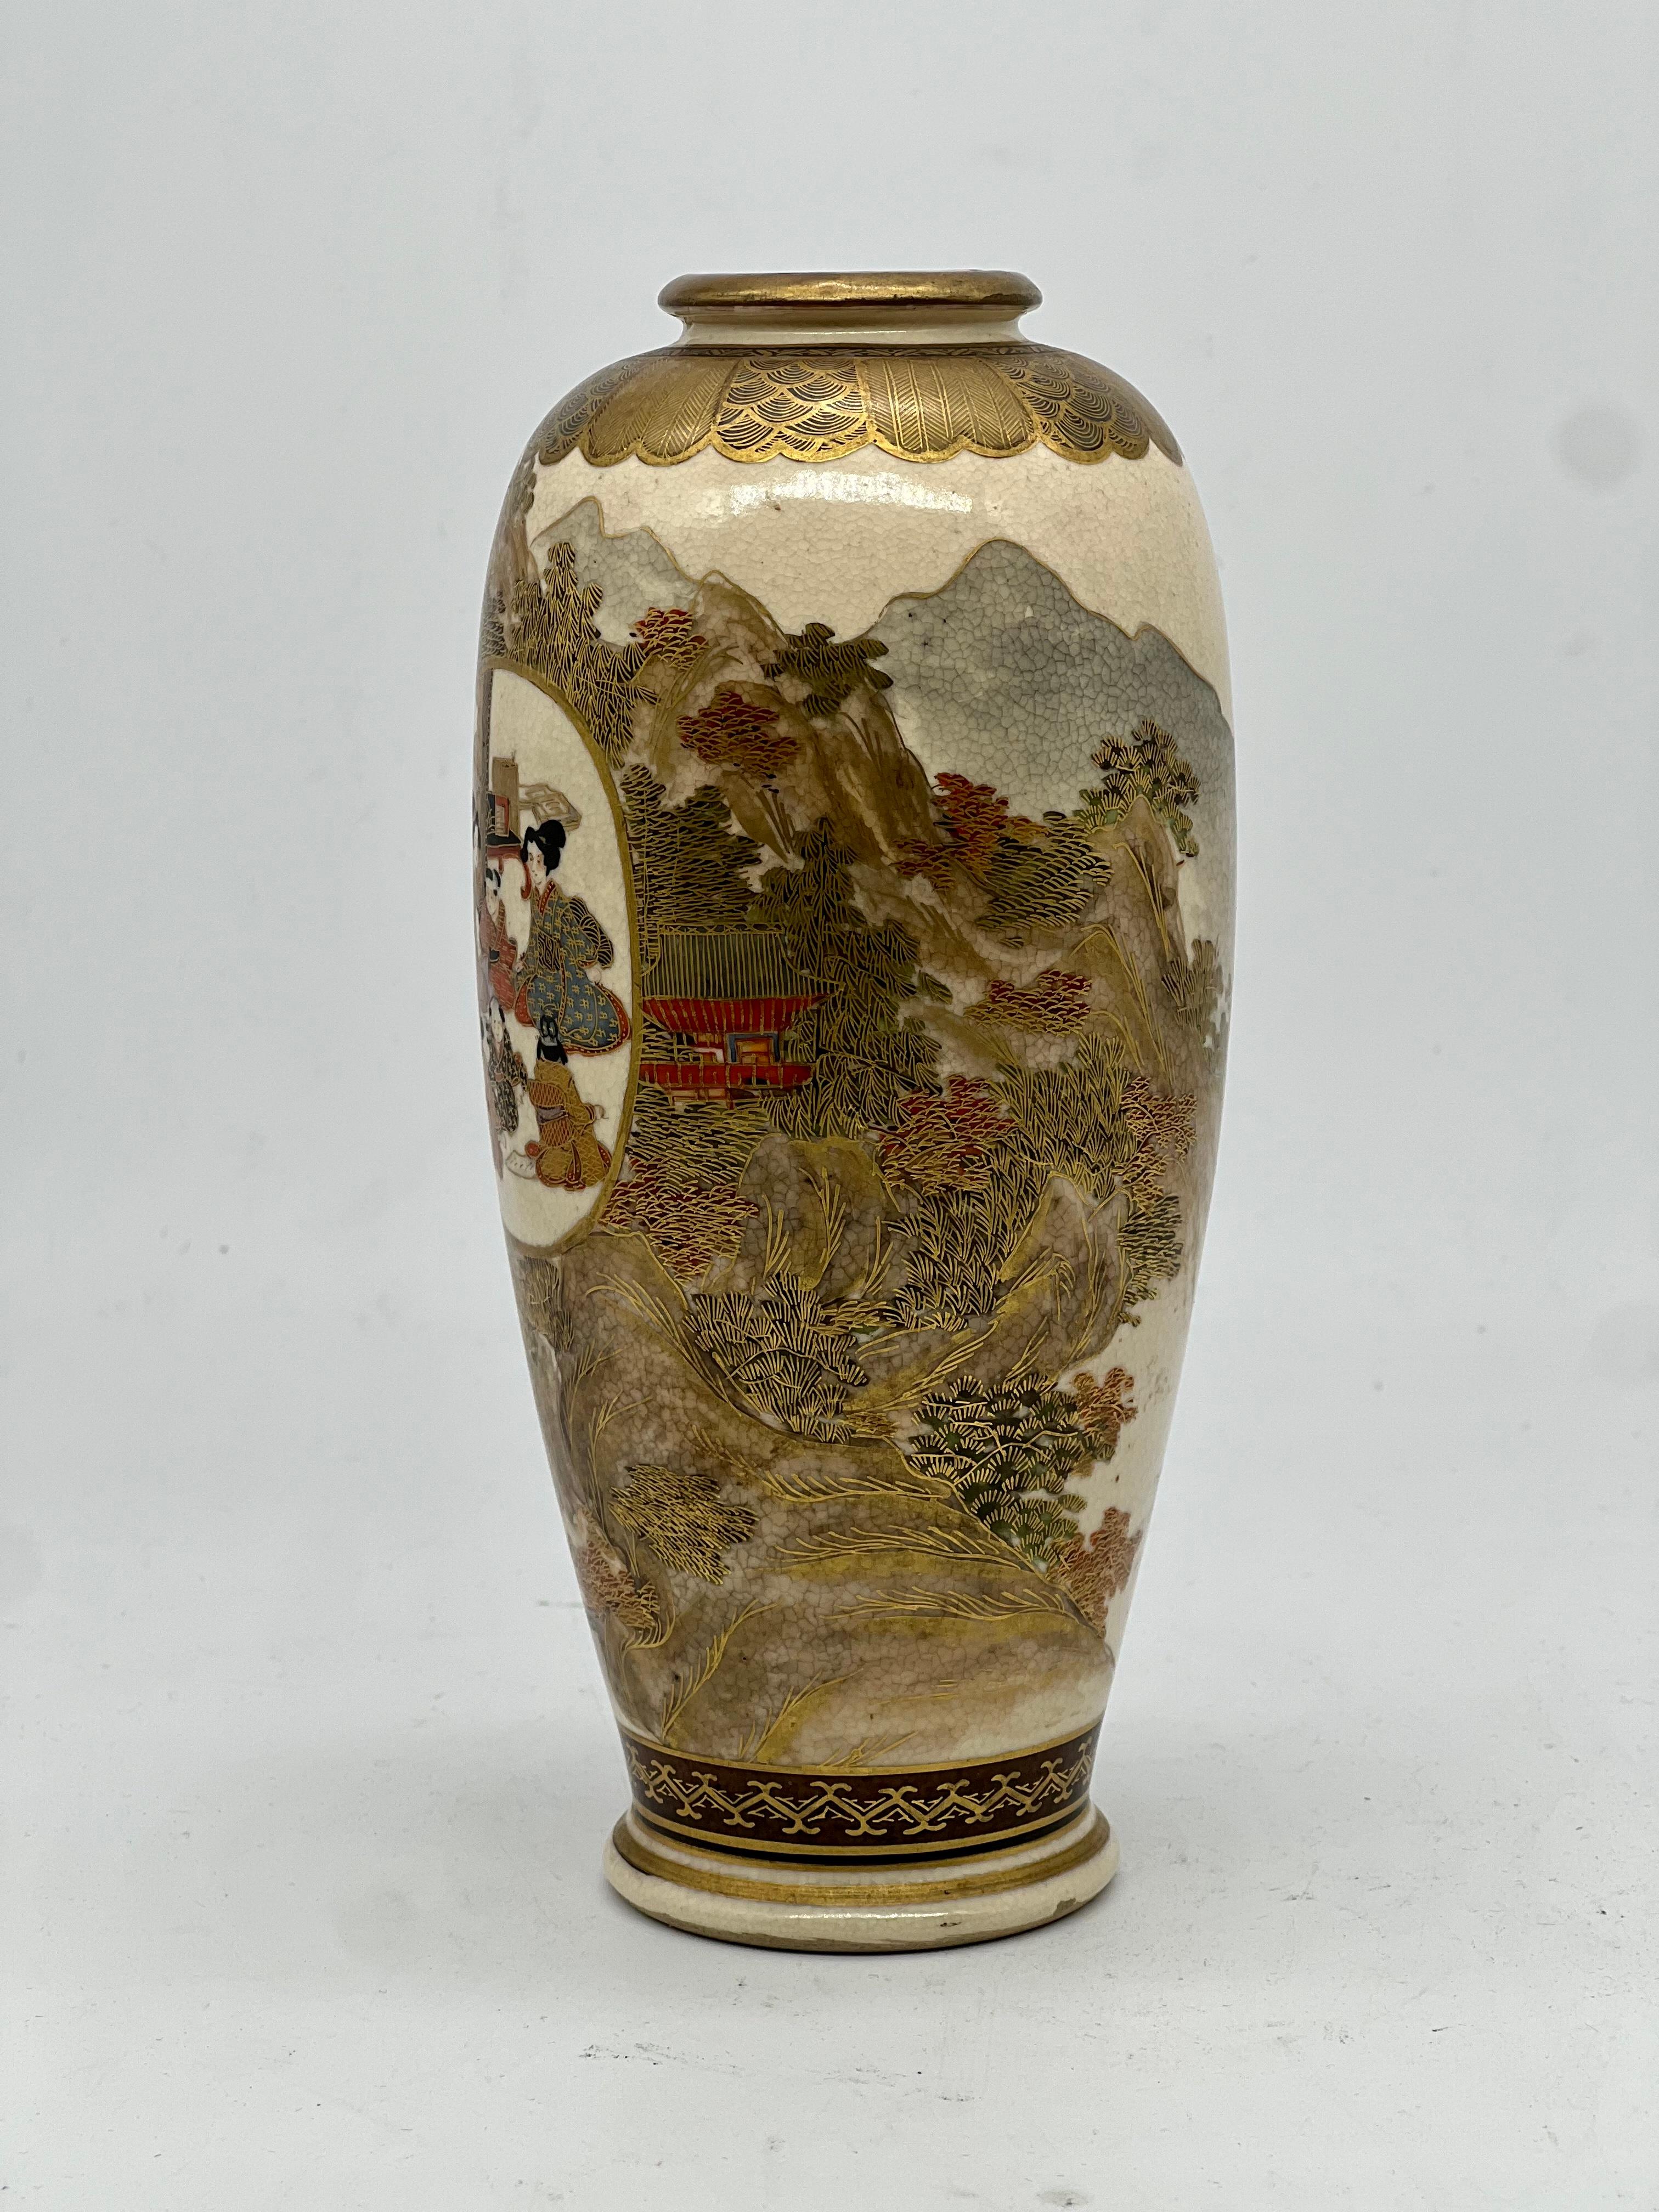 A Magnificent Japanese Satsuma Vase. Signed. Meiji period. For Sale 4